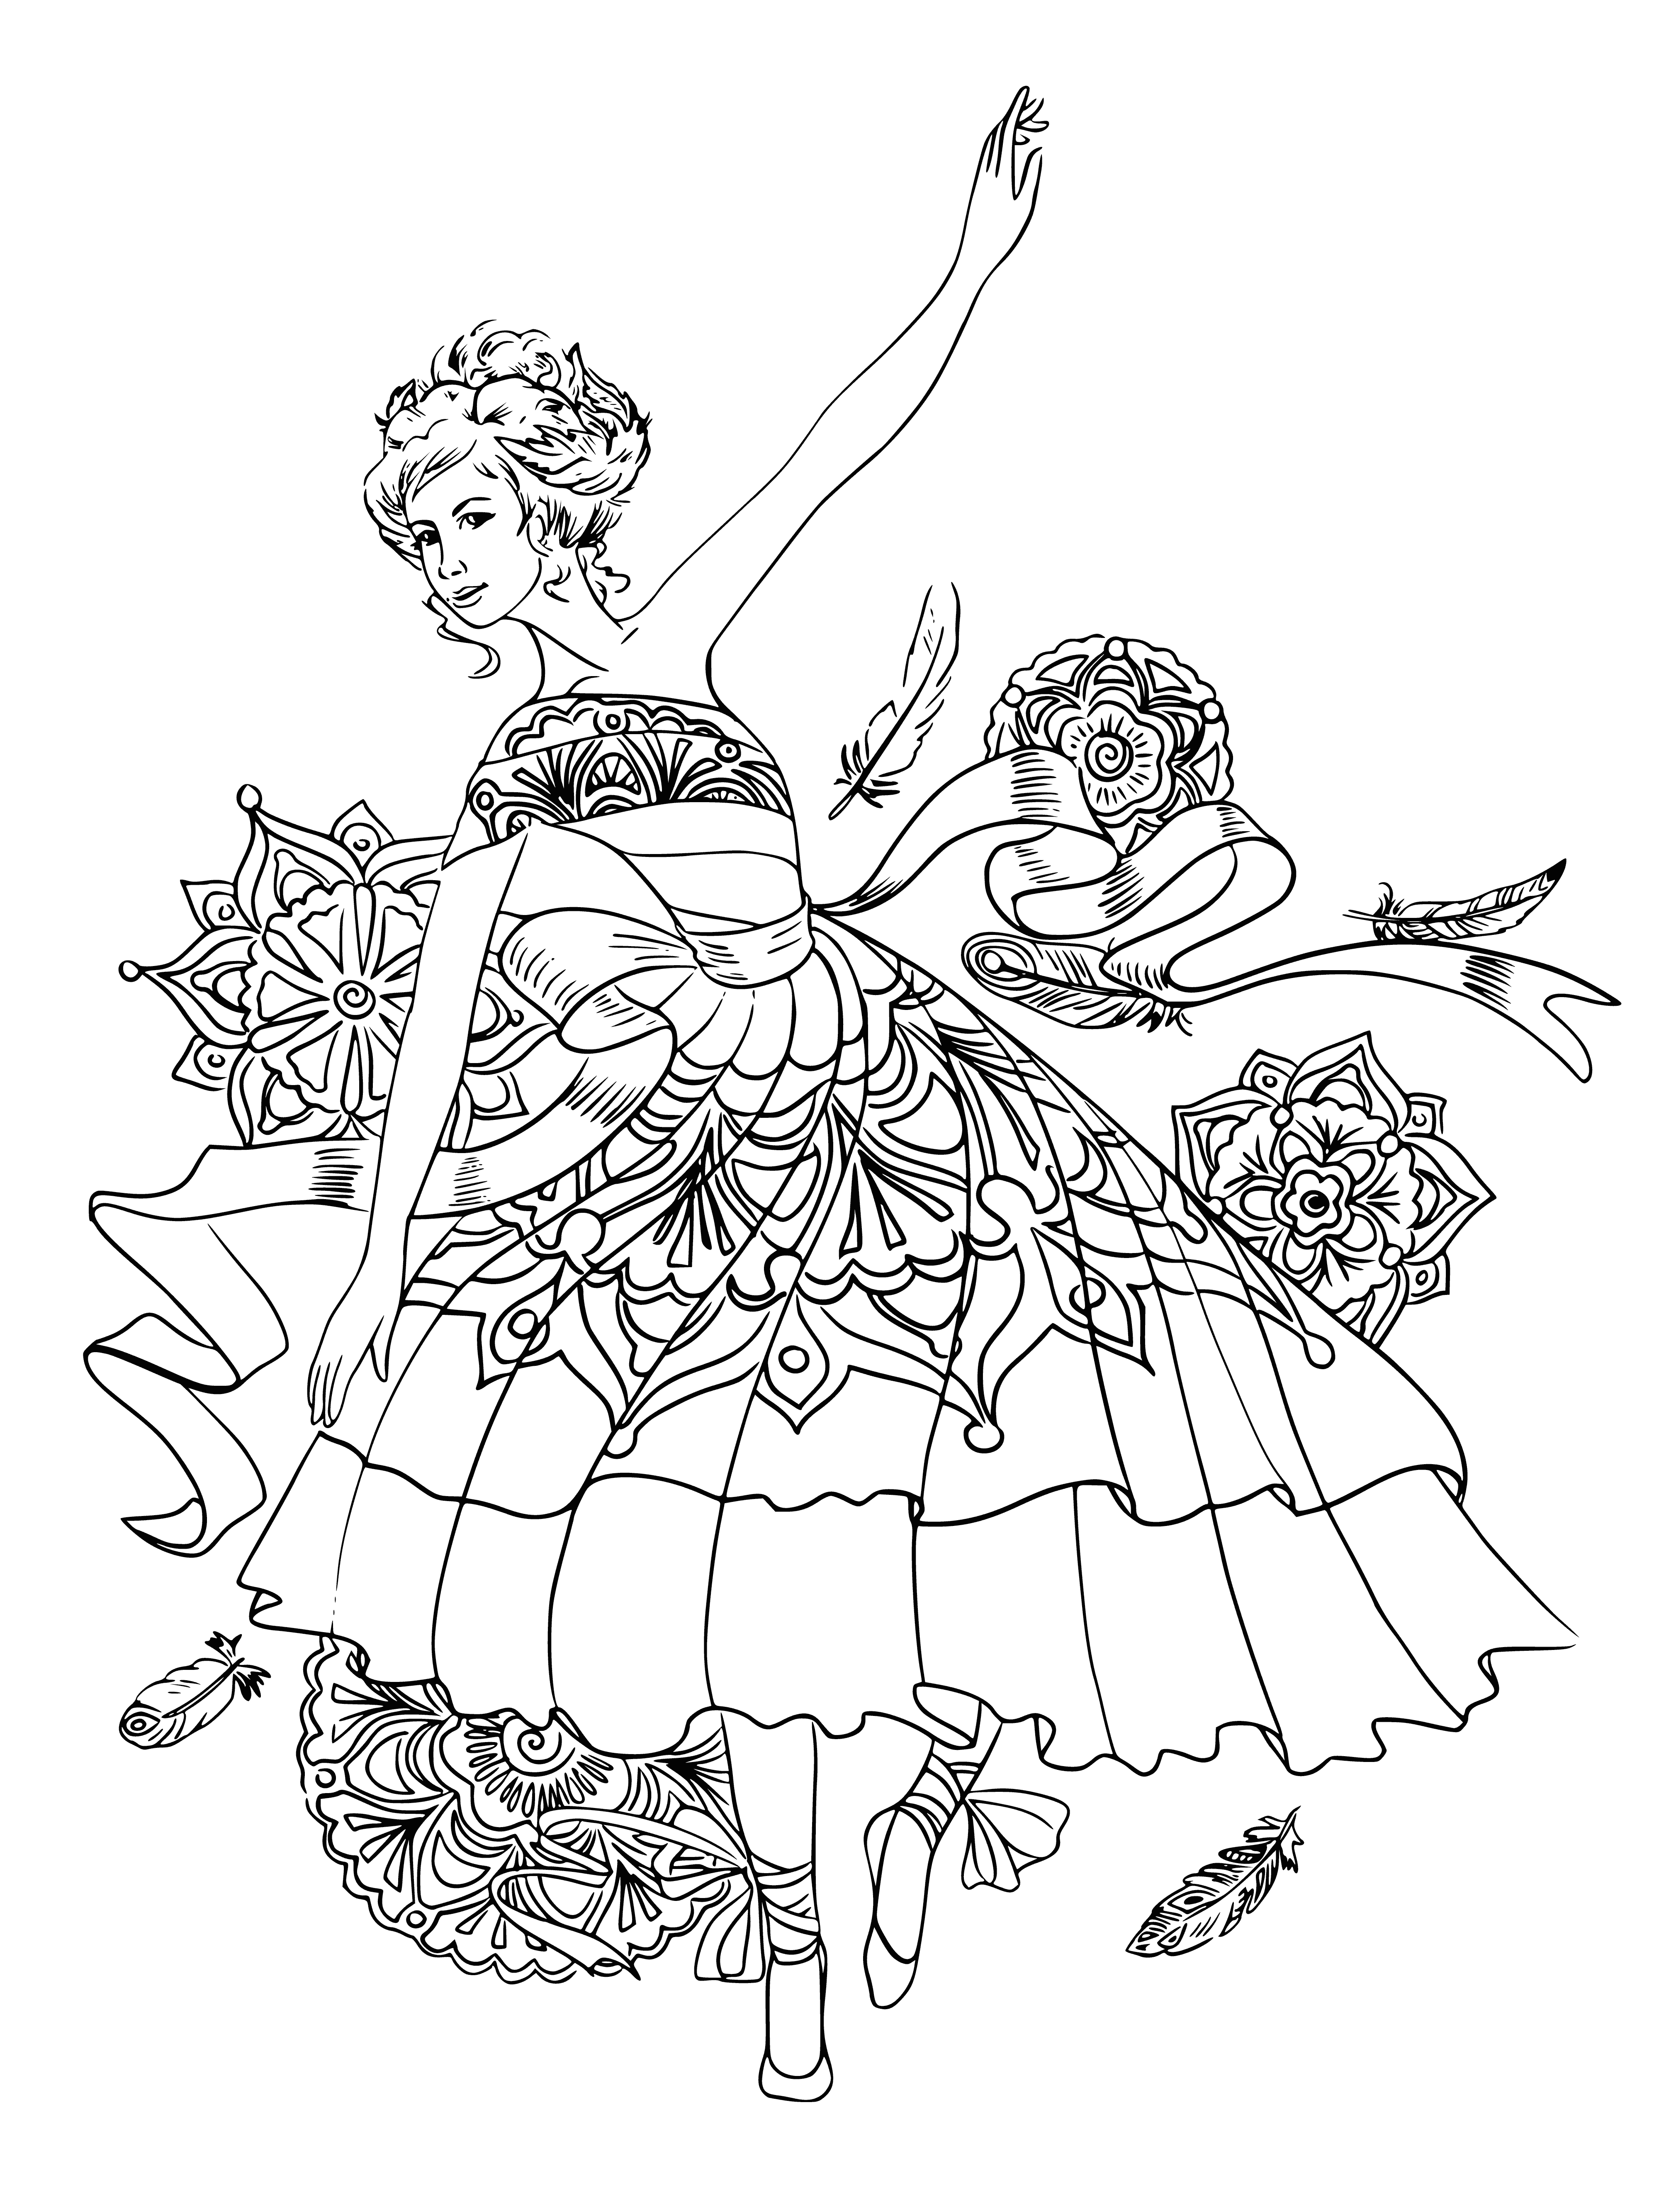 coloring page: 3 ballerinas in poses, wearing pink tutus & pointe shoes, hair pulled back into buns, in a pale blue room.